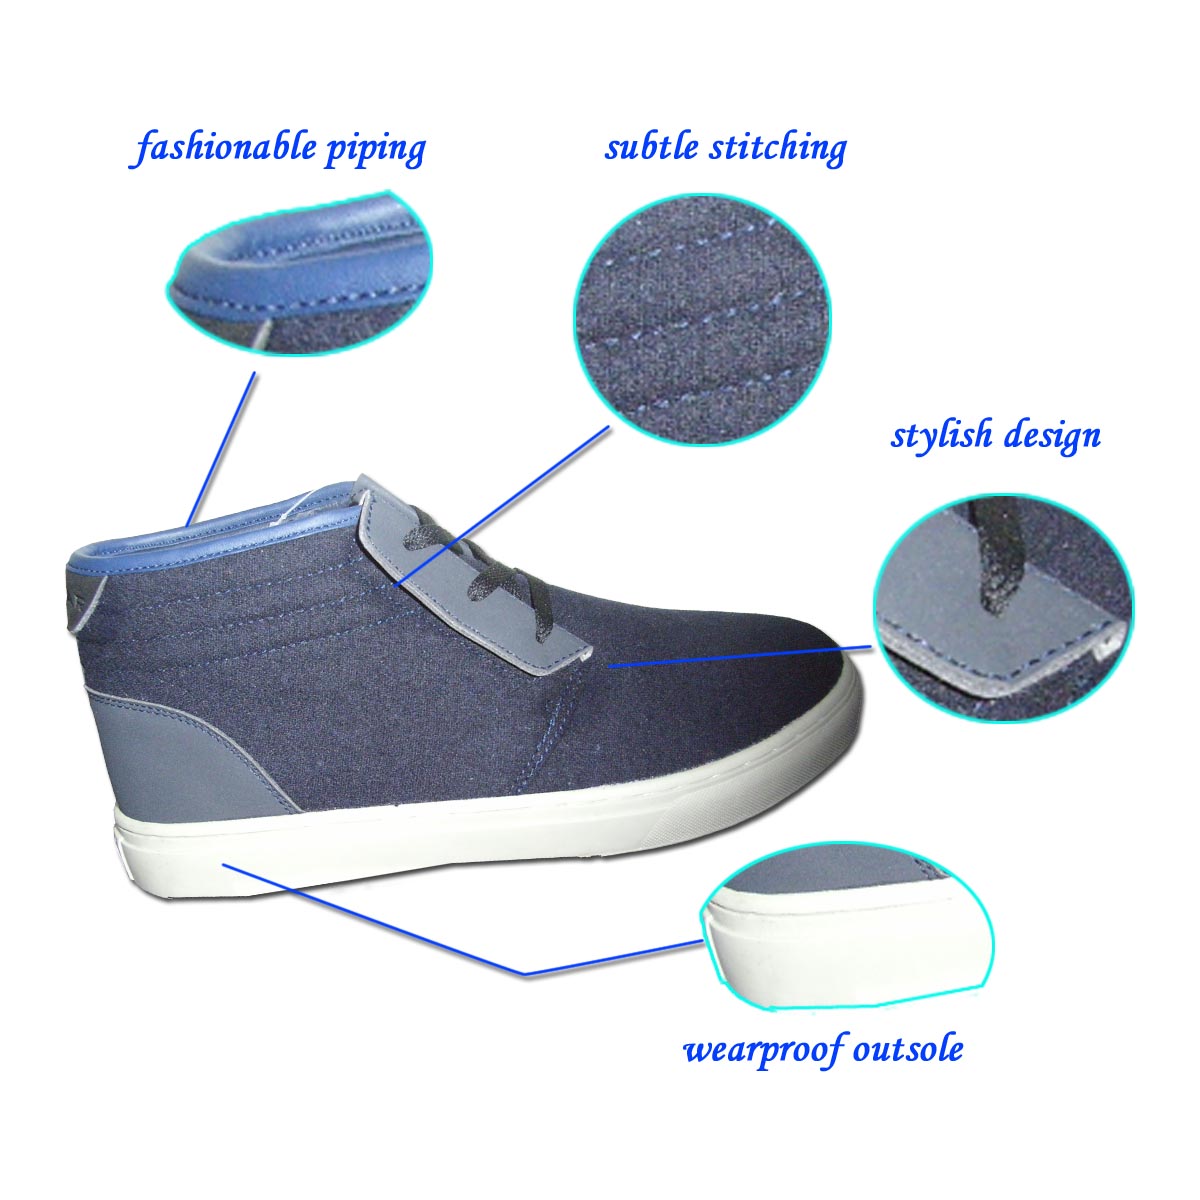 Best Selling European Men's Fashionable Cotton Fabric Casual Shoes with Anti-slip Rubber Outsole